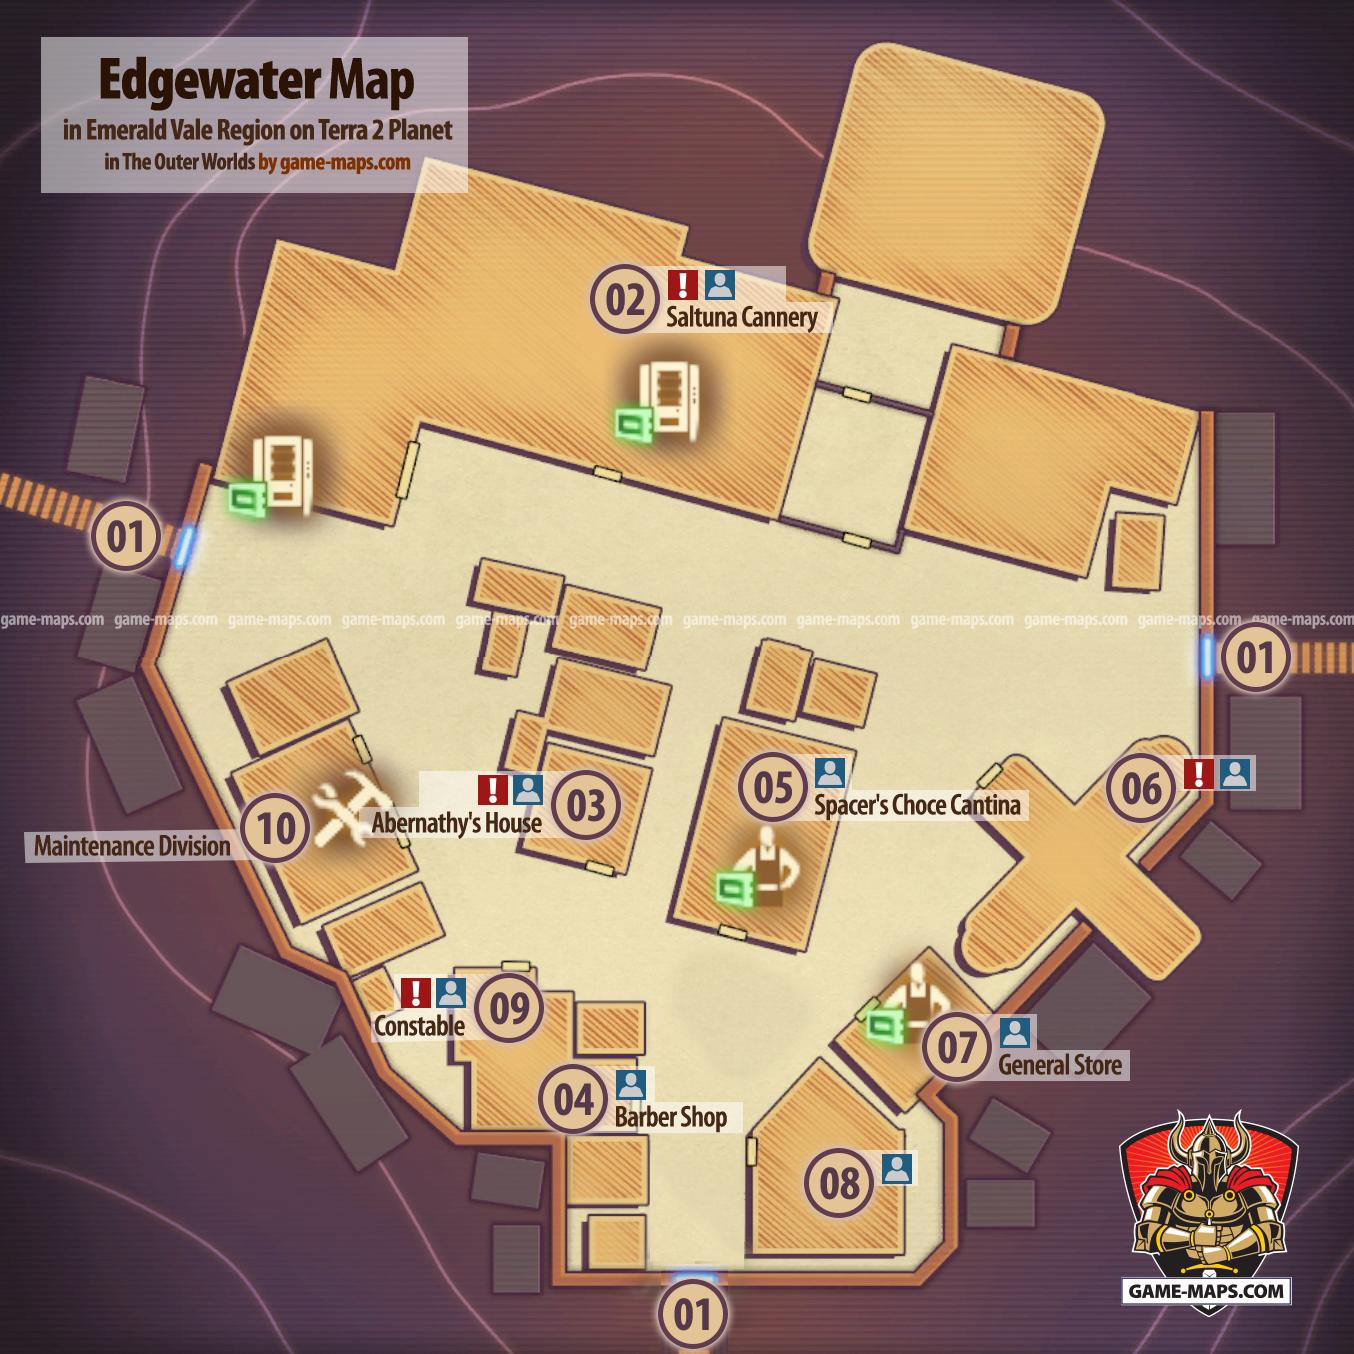 Edgewater Map in Emerald Vale on Terra 2 Planet for The Outer Worlds